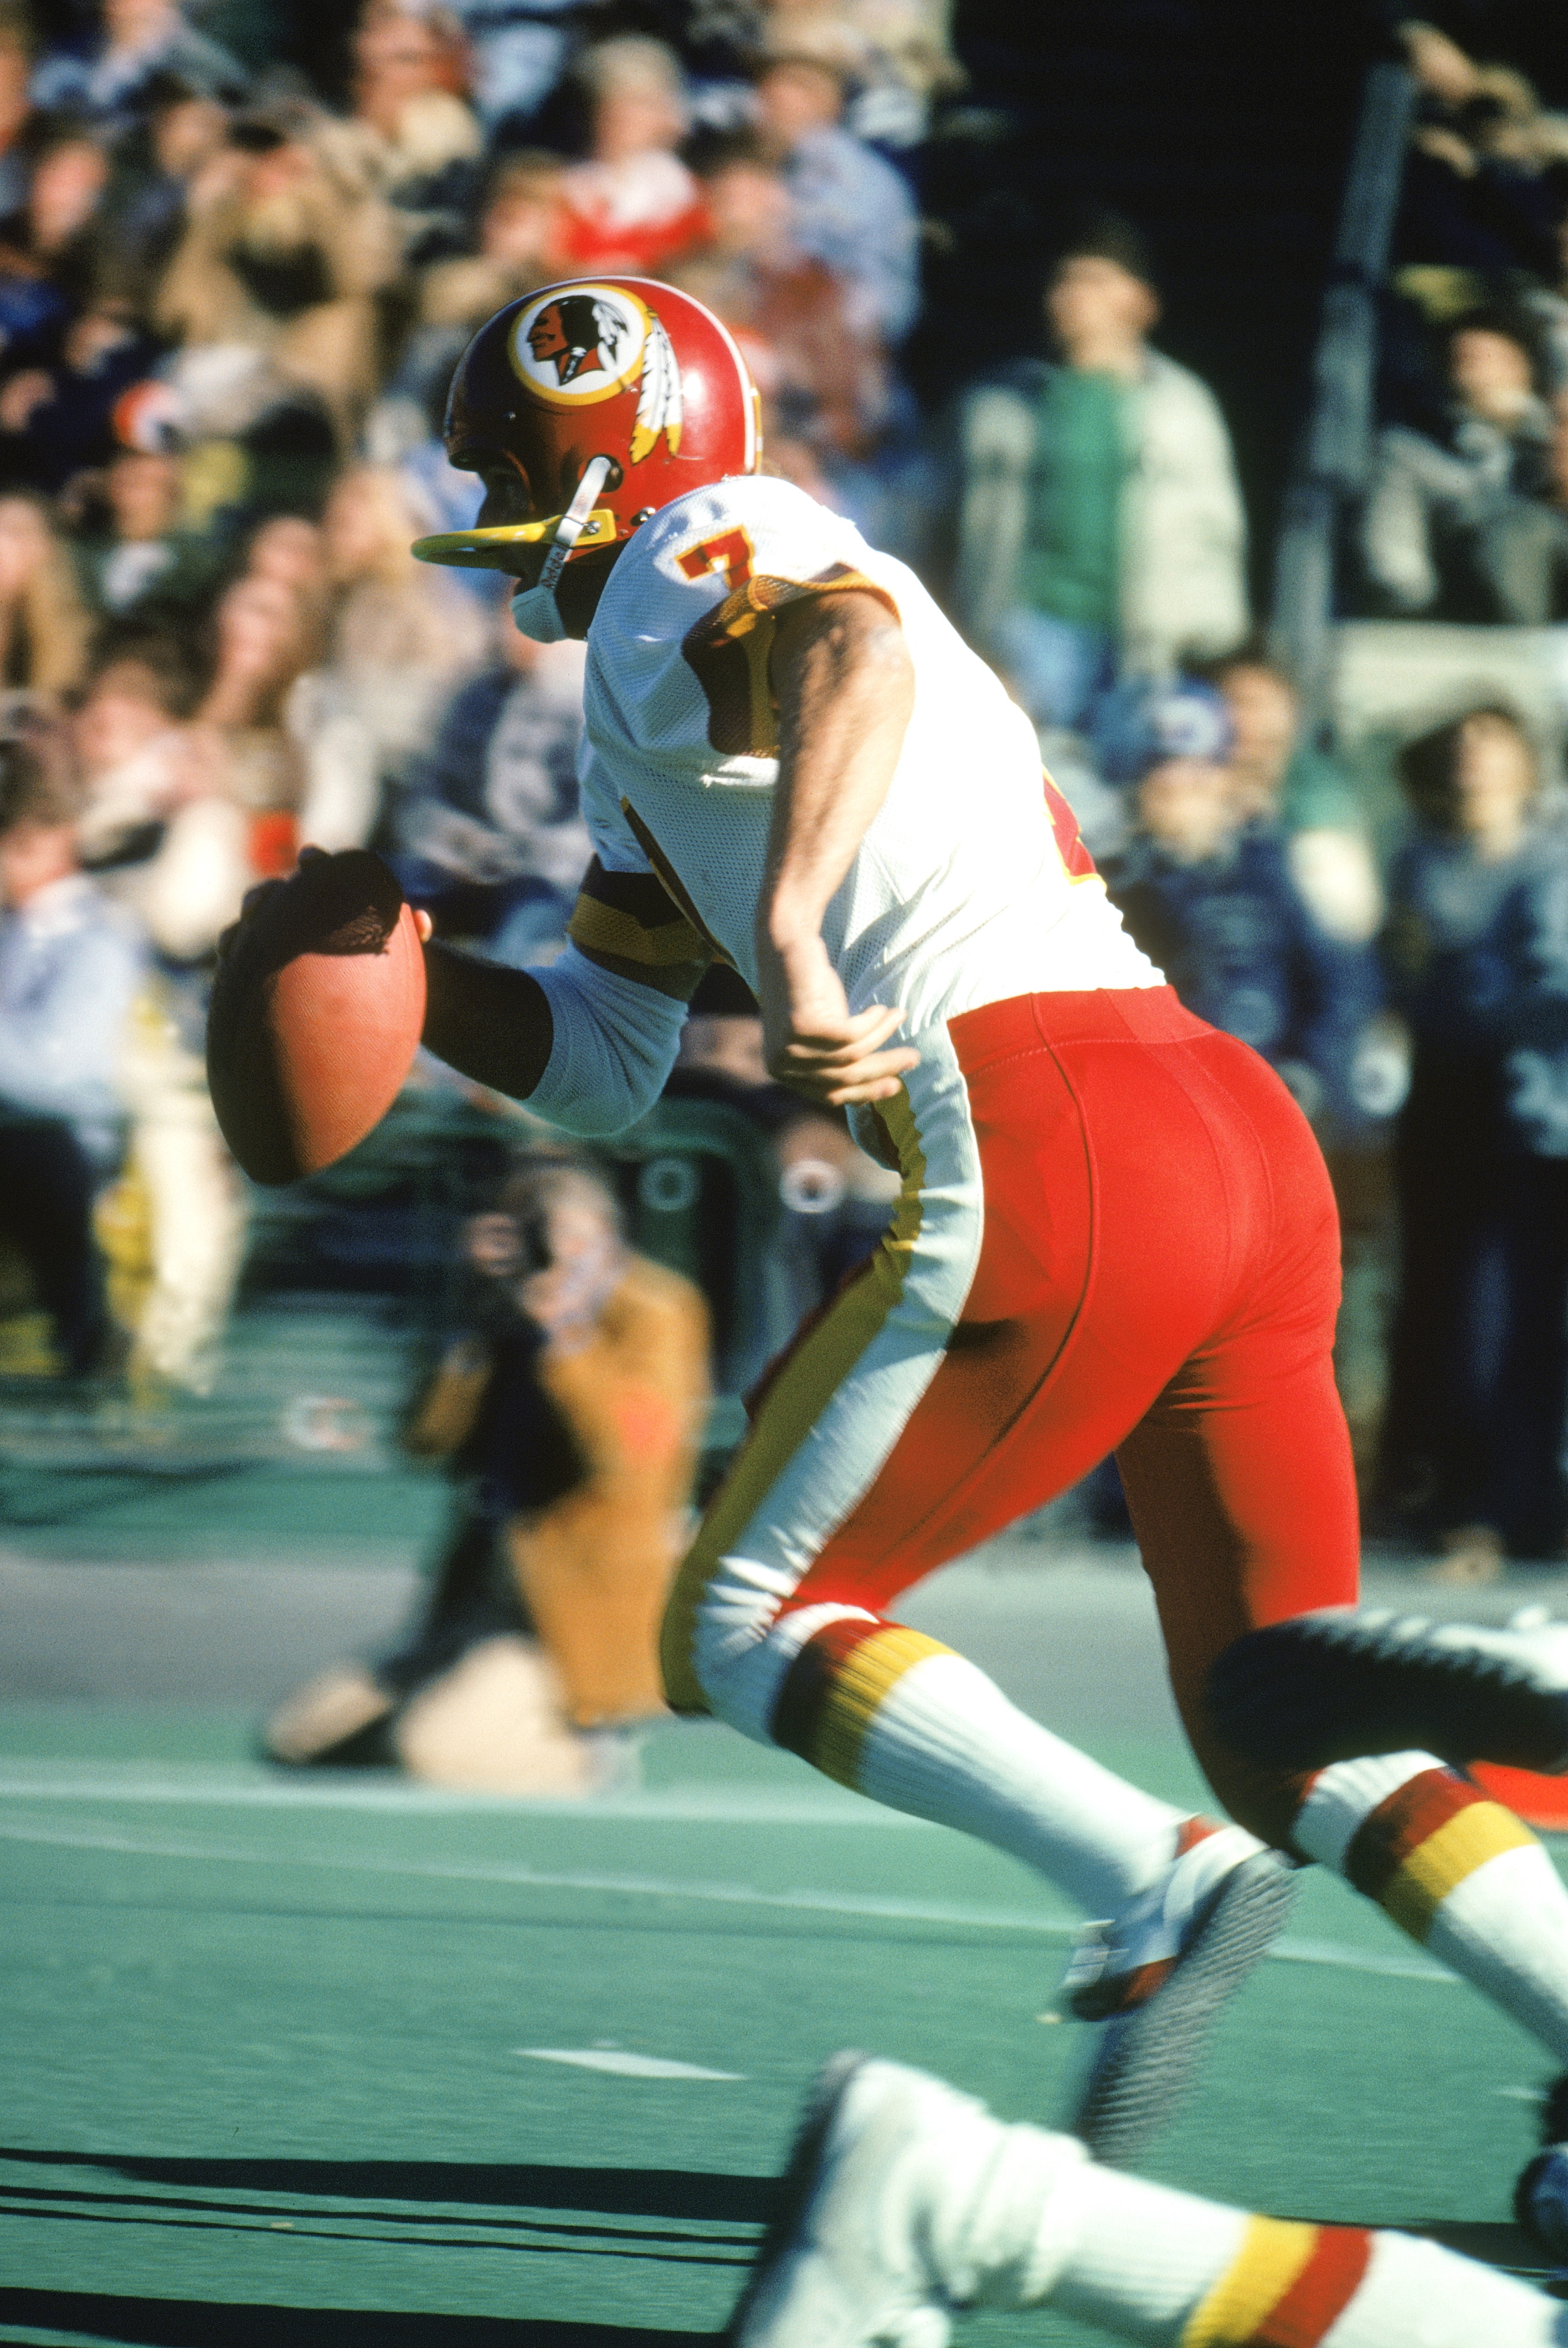 CHICAGO -1980:  Joe Theismann #7 of the Washington Redskins runs as he looks to pass during the 1980 NFL season game against the Chicago Bears at Soldier Field in Chicago, Illinois. The Bears defeated the Redskins 35-21. (Photo by: Jonathan Daniel/Getty I